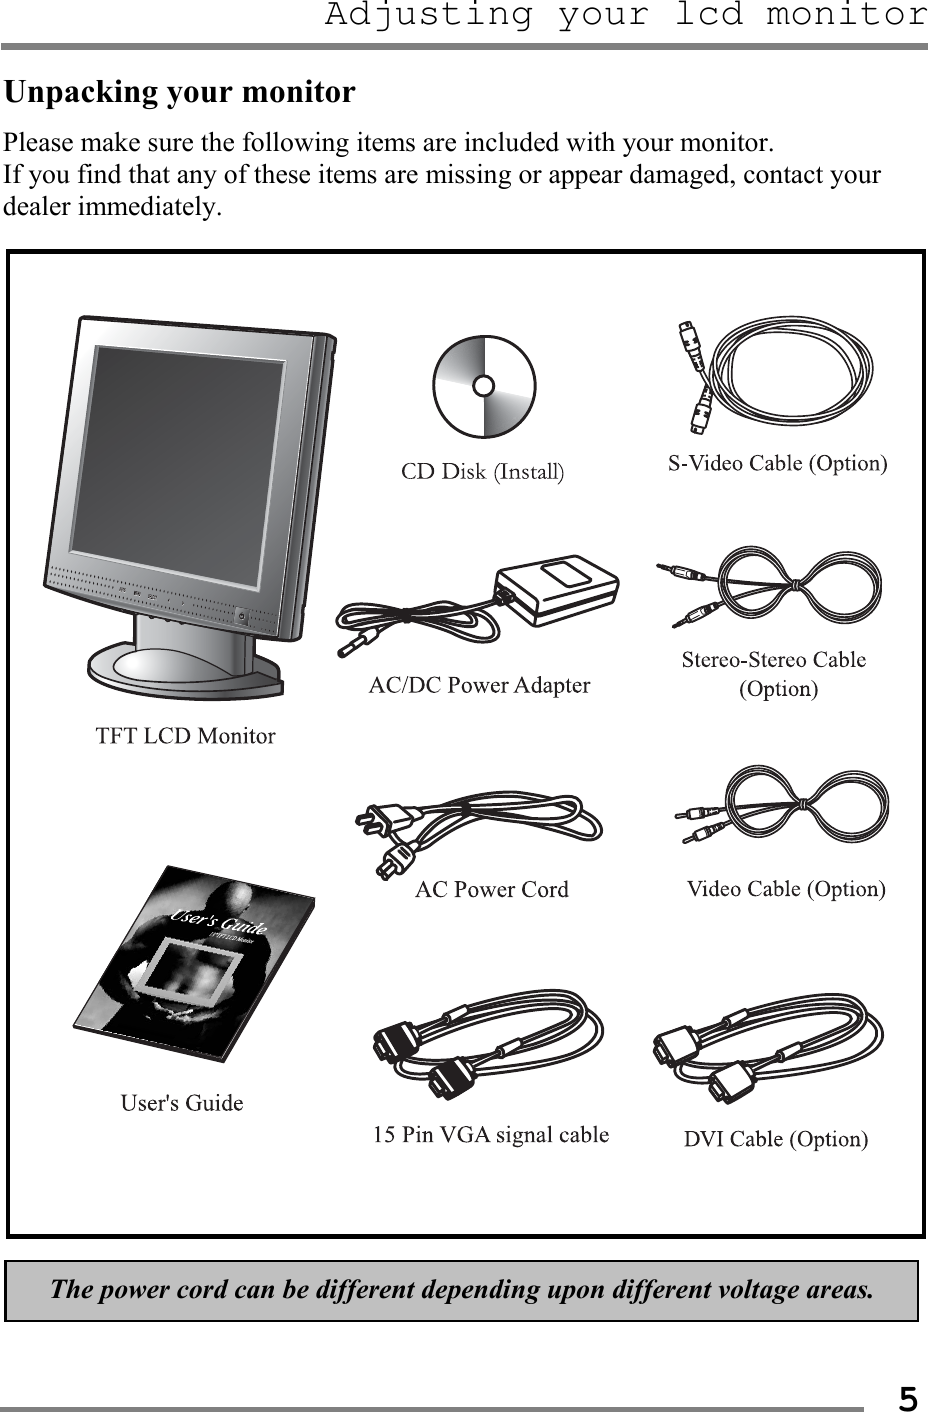 Adjusting your lcd monitor   5Unpacking your monitor Please make sure the following items are included with your monitor.   If you find that any of these items are missing or appear damaged, contact your dealer immediately.                                  The power cord can be different depending upon different voltage areas. 